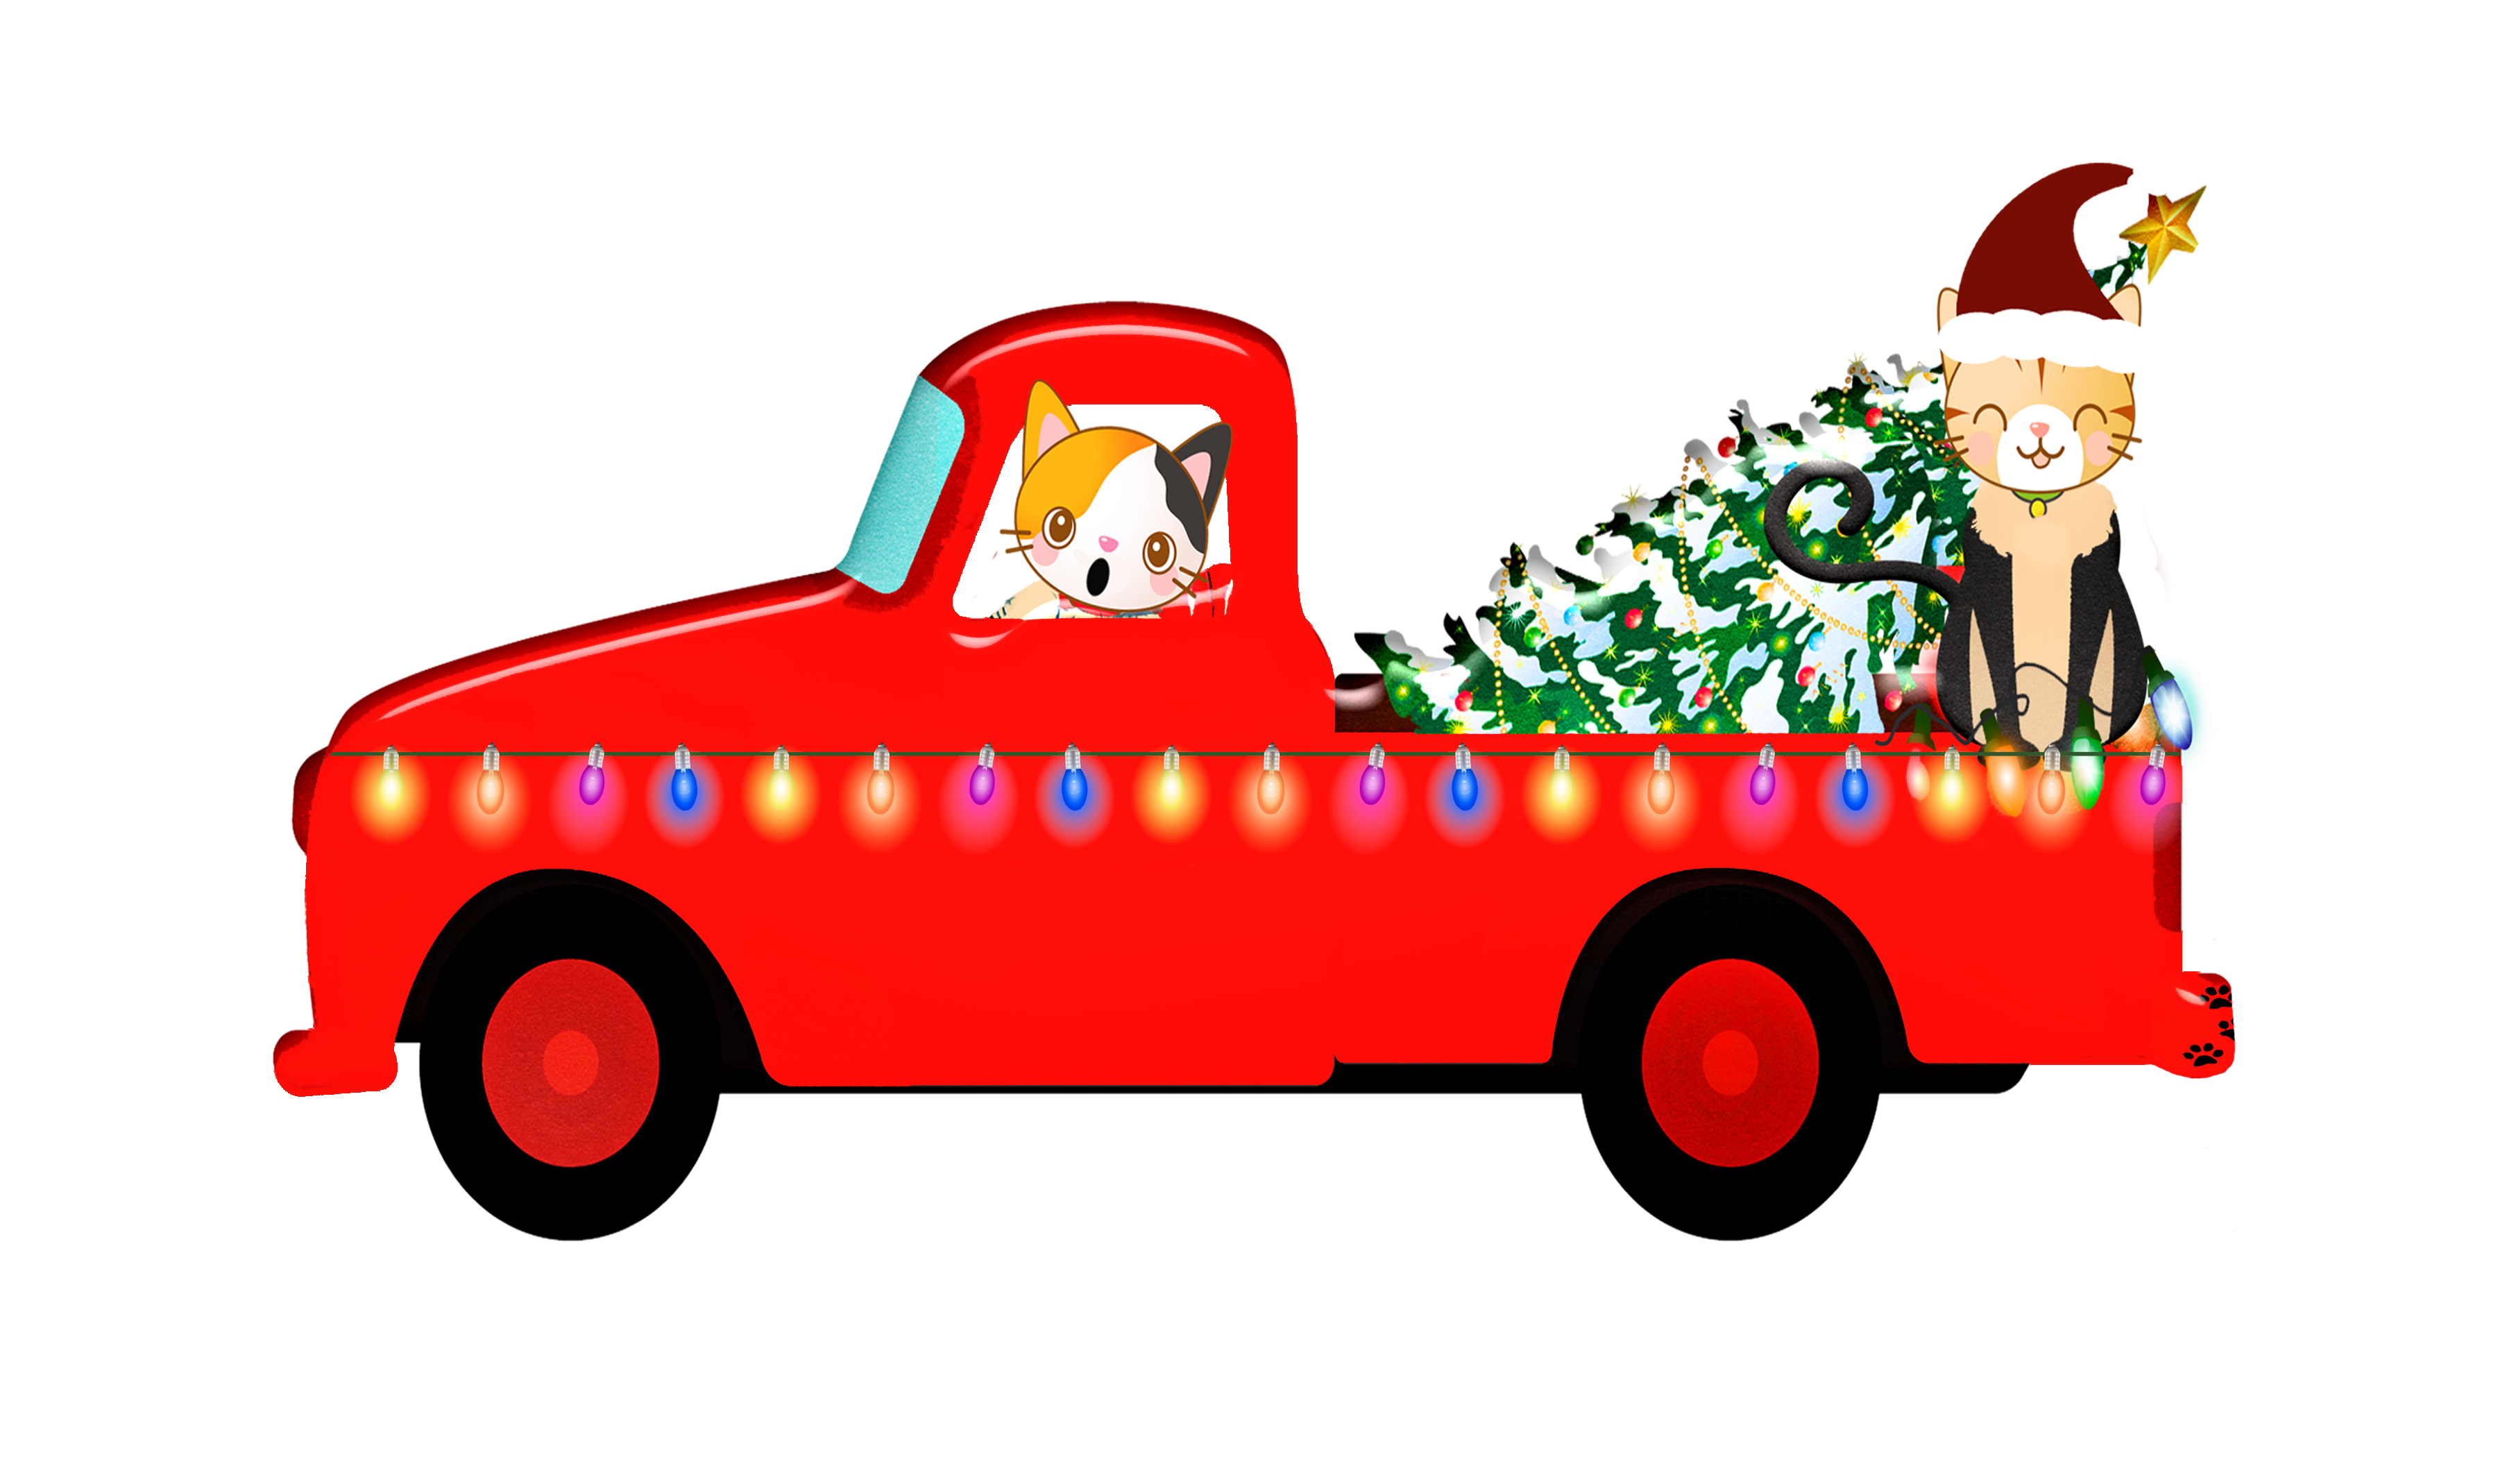 Christmas truck drawing free image download